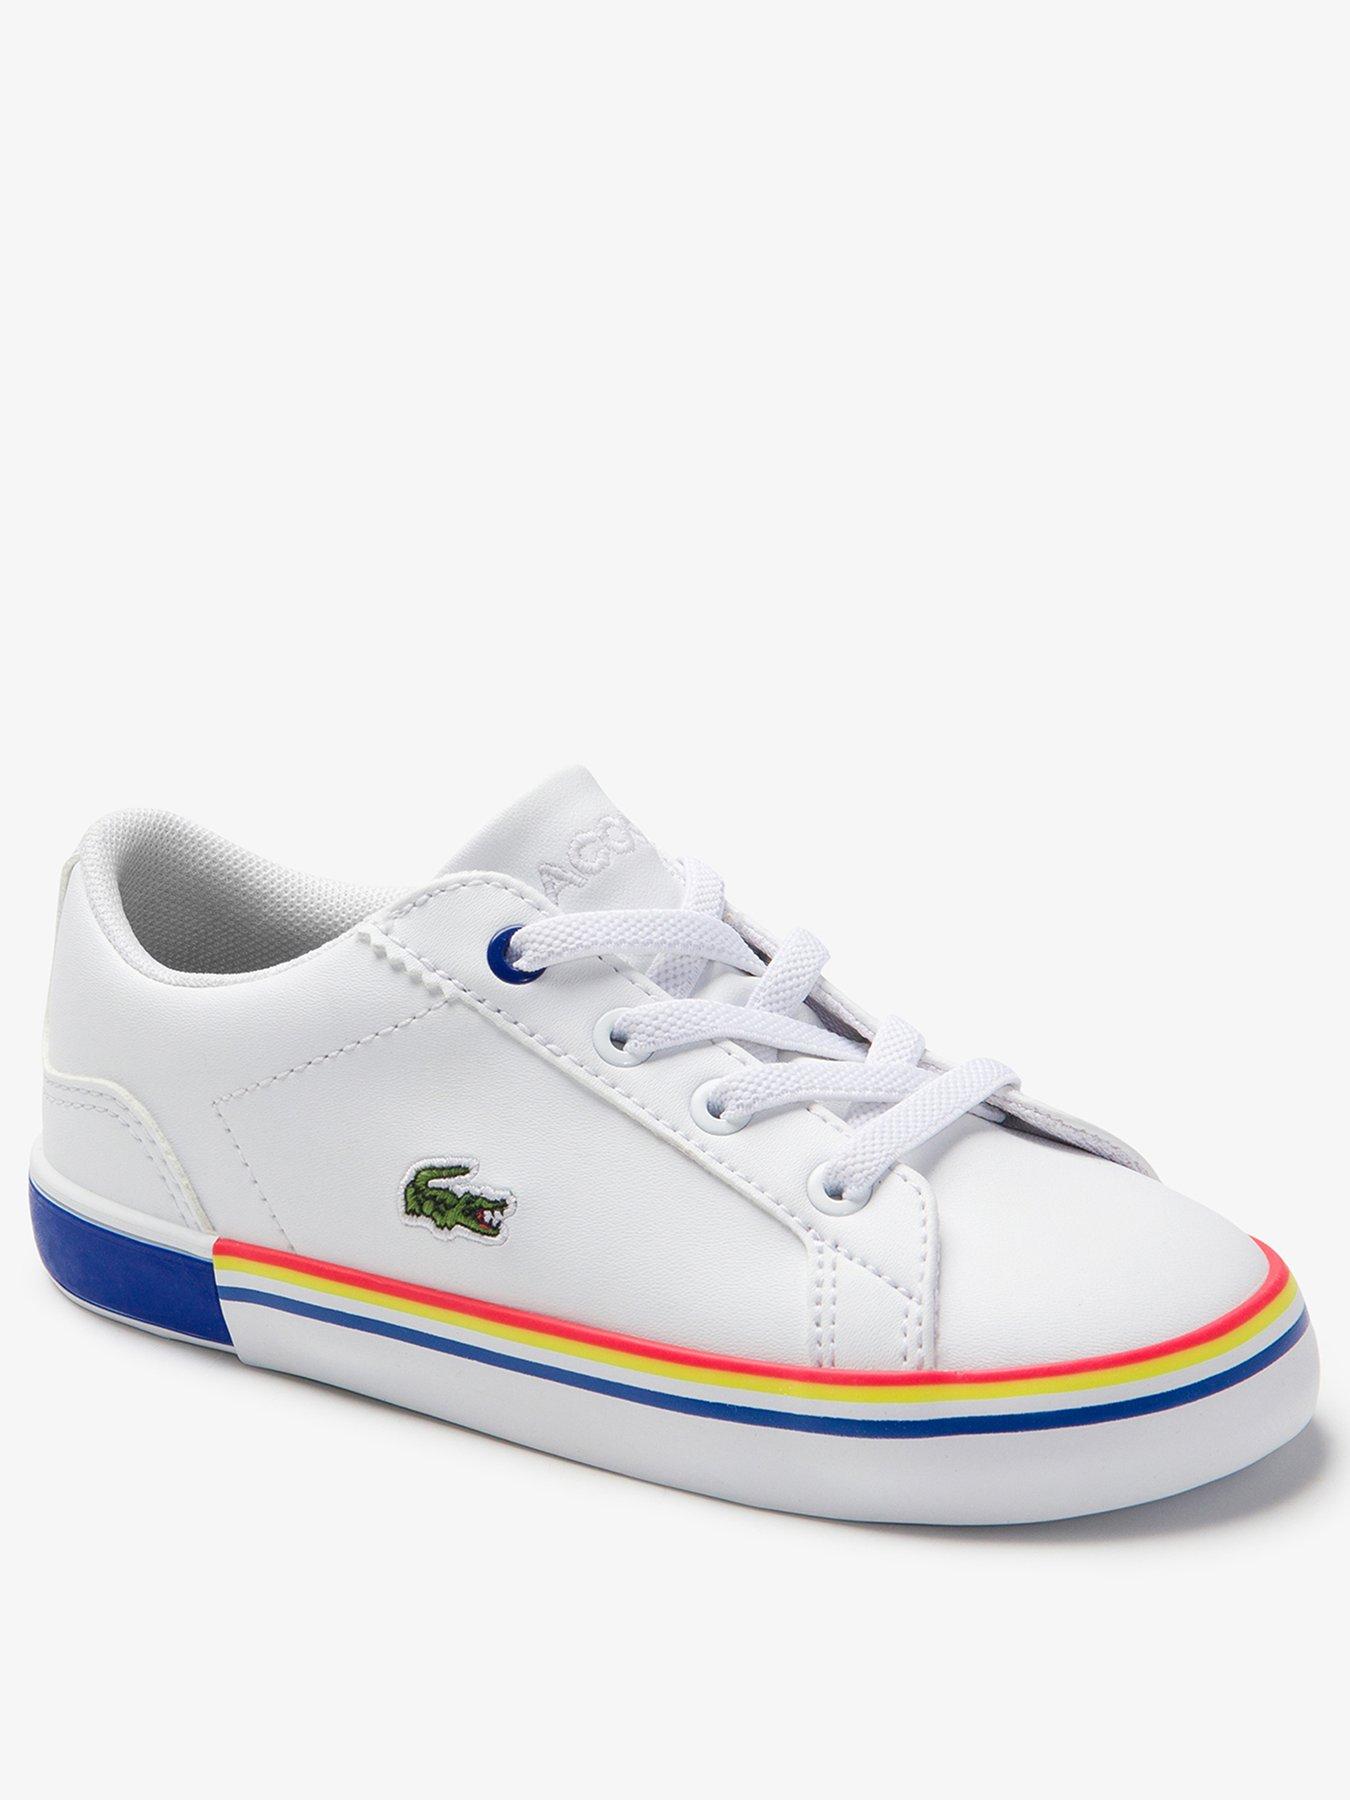 Lacoste Kids Outlet Britain, SAVE 36%